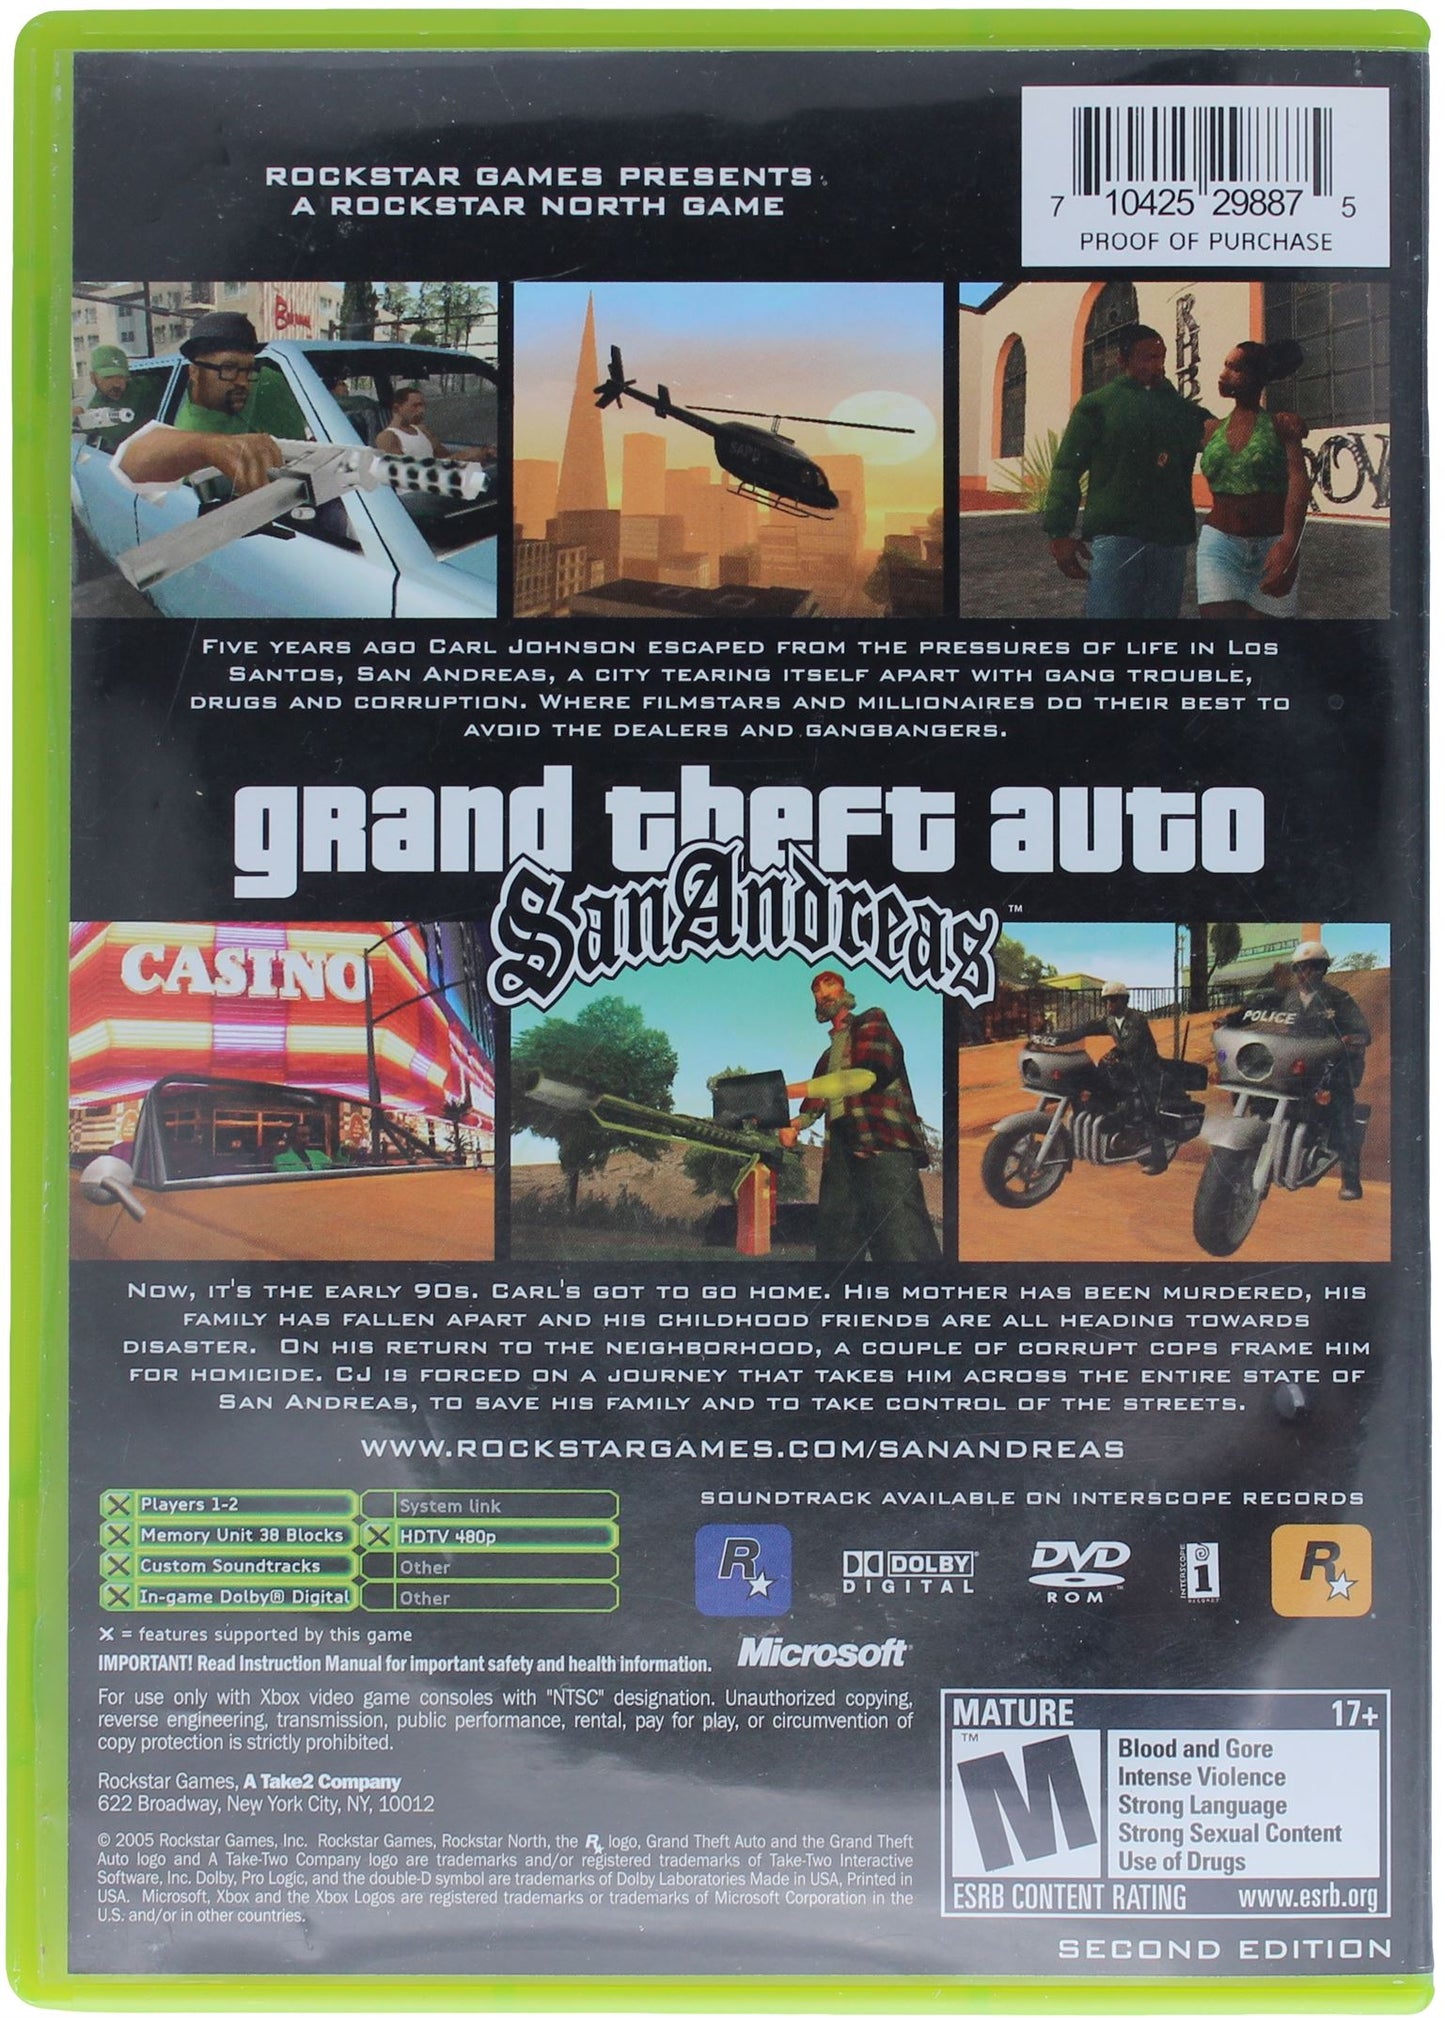 Grand Theft Auto: San Andreas [Second Edition]